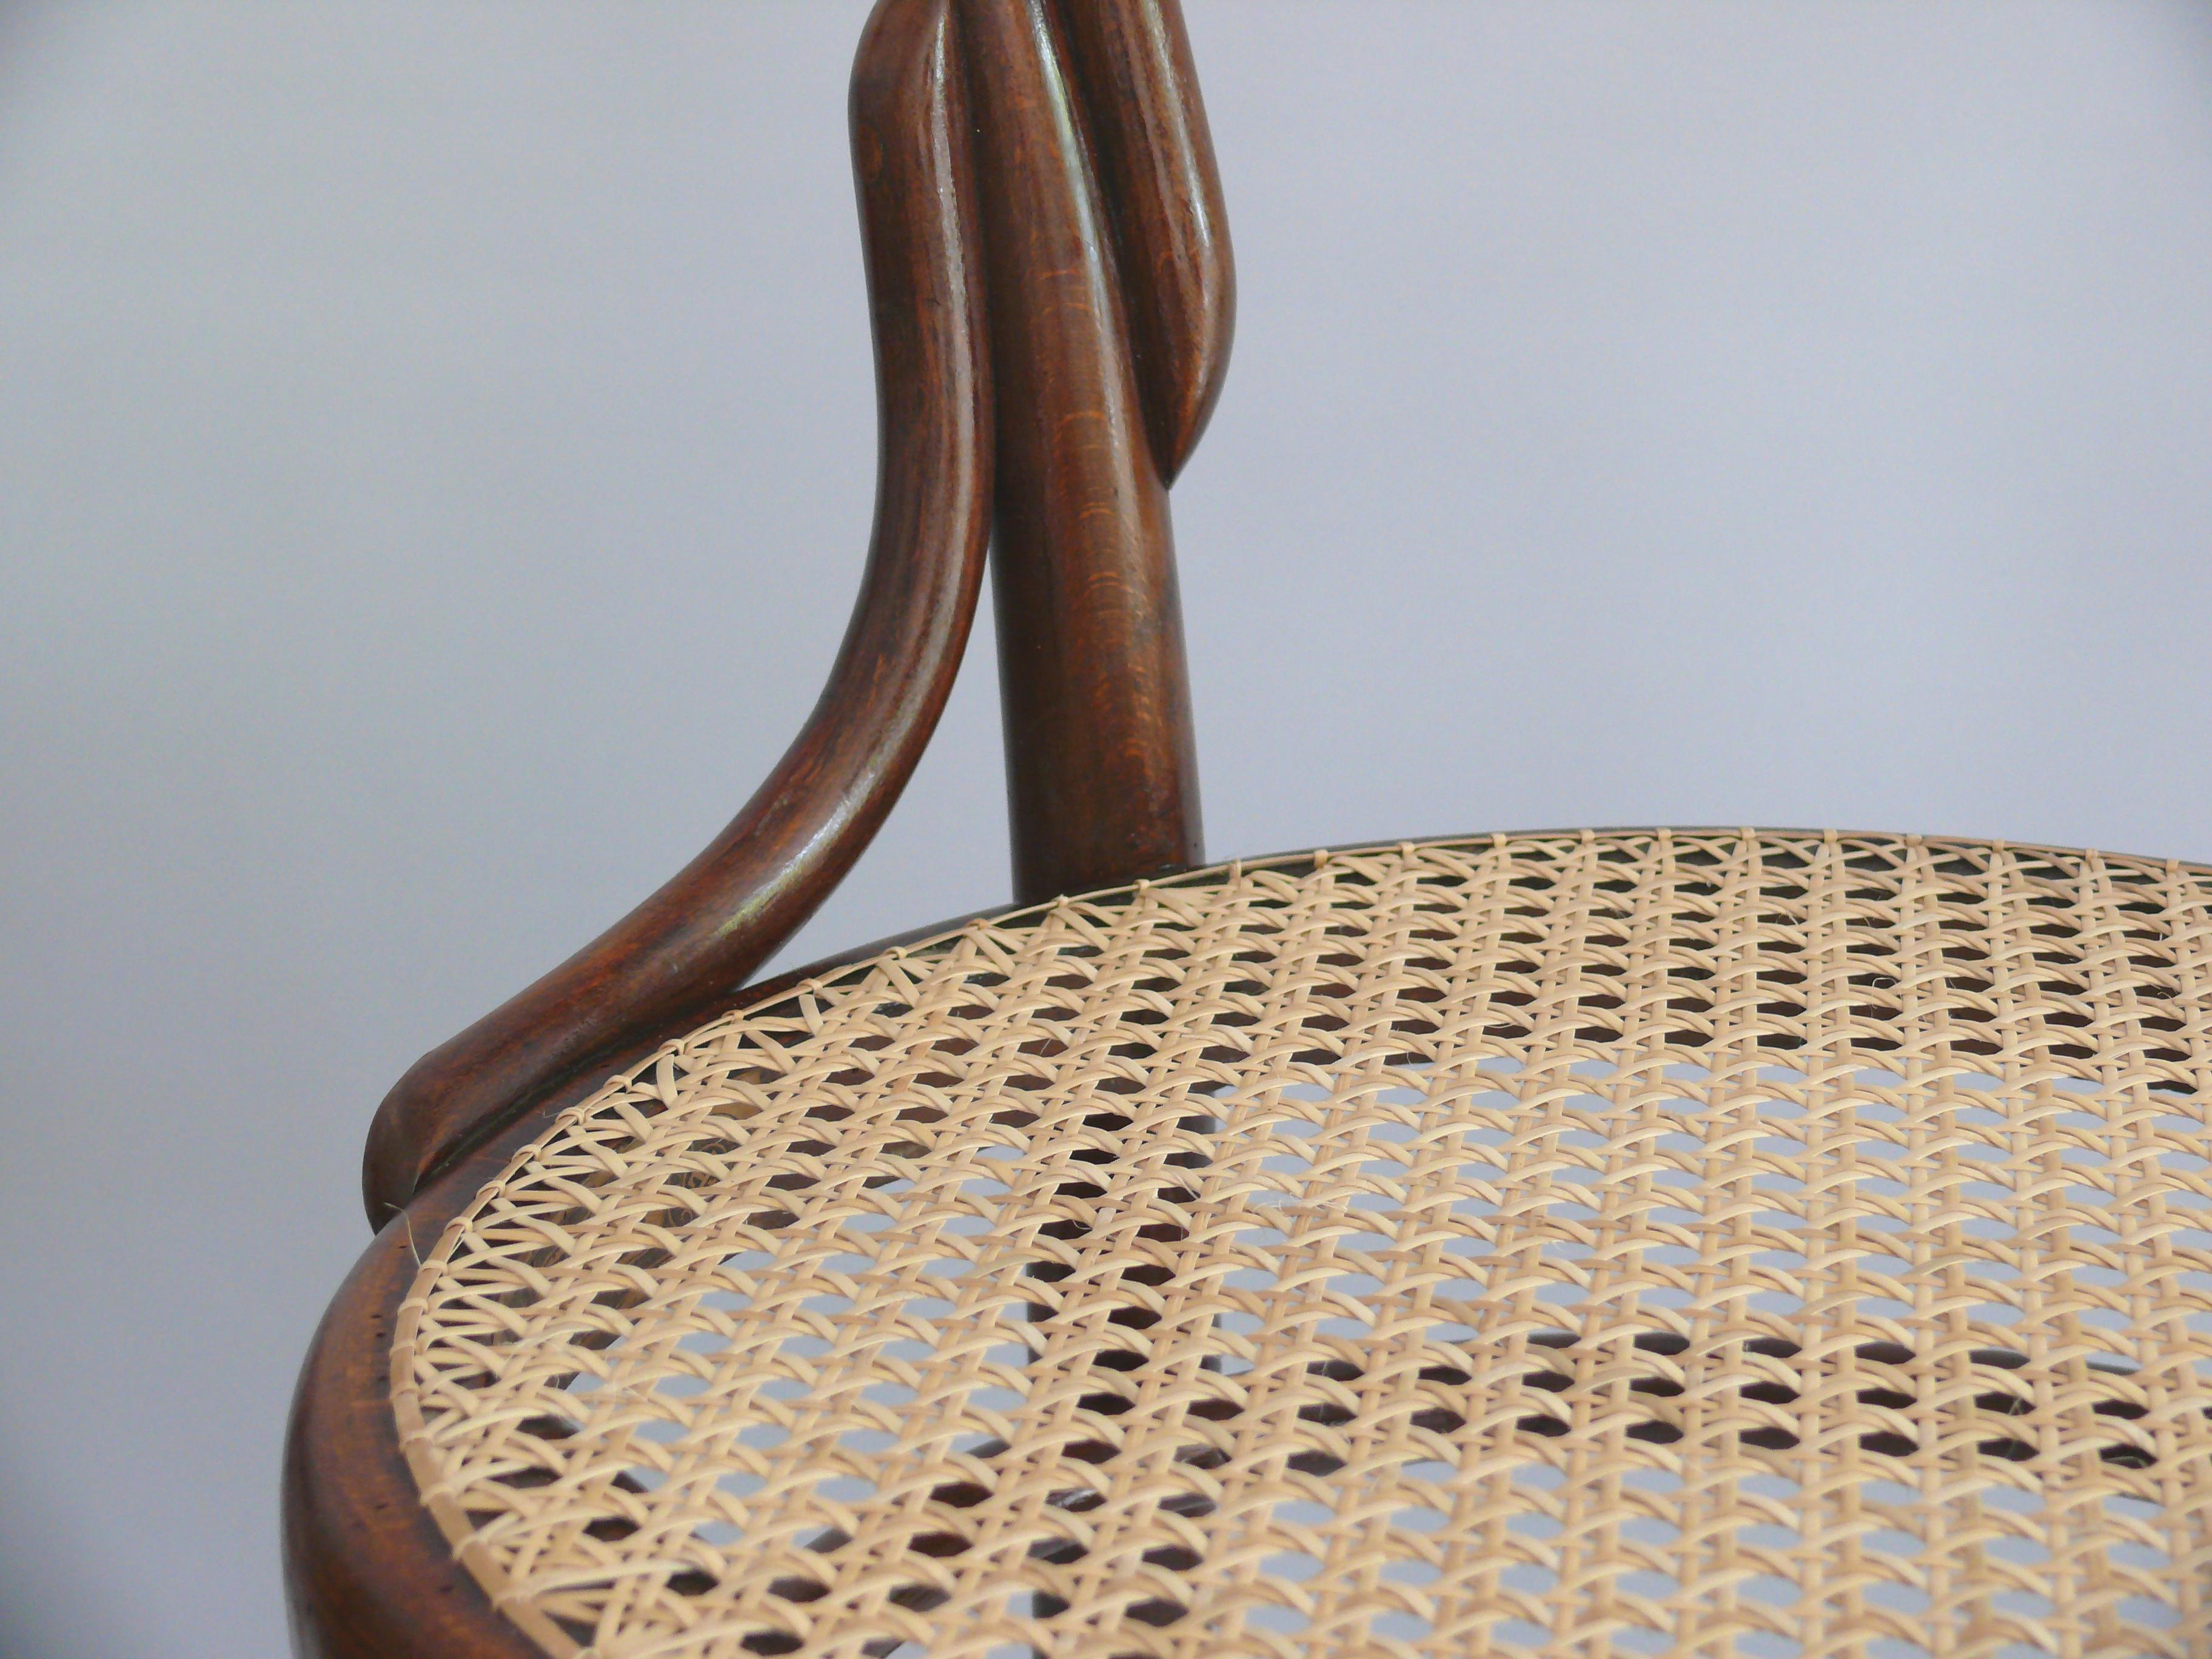 Woodwork Set of 2 Original Thonet Bentwood Chairs No. 14, Late 19th